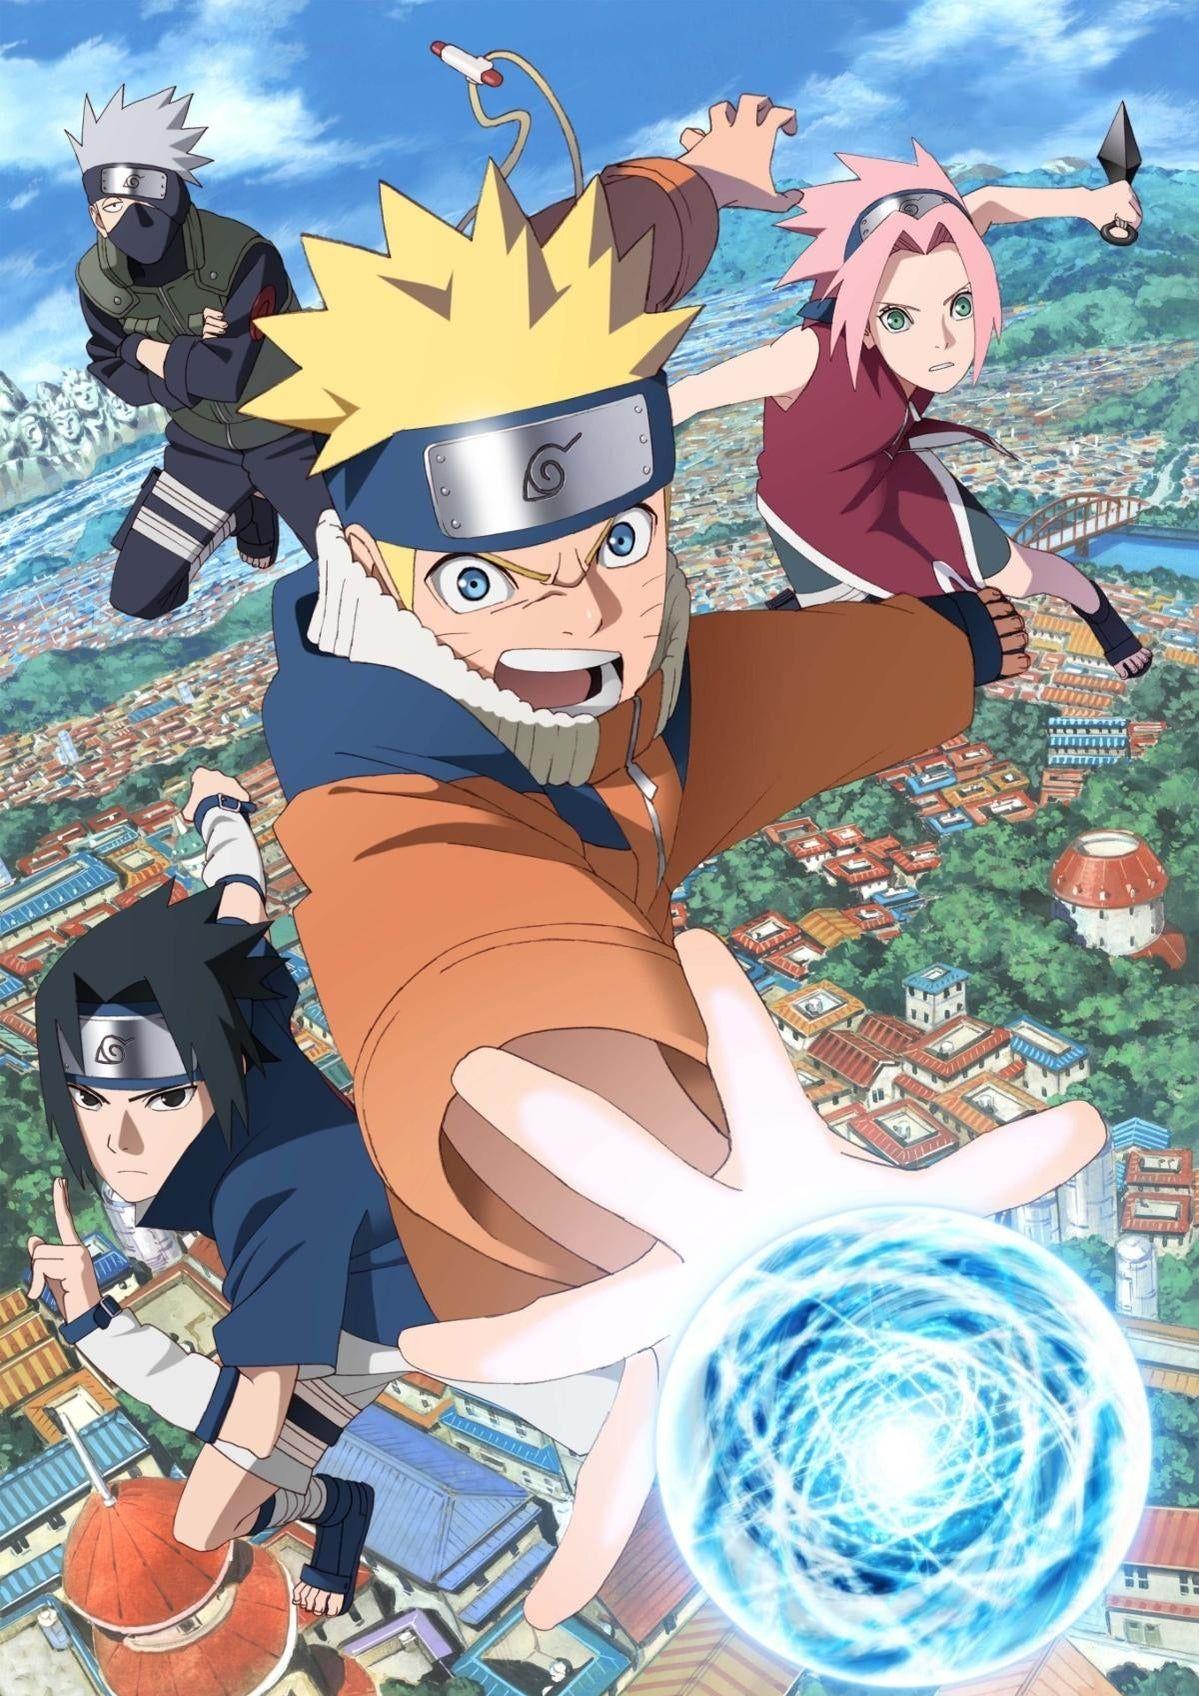 Naruto 20th Anniversary Poster Hypes New Episodes In